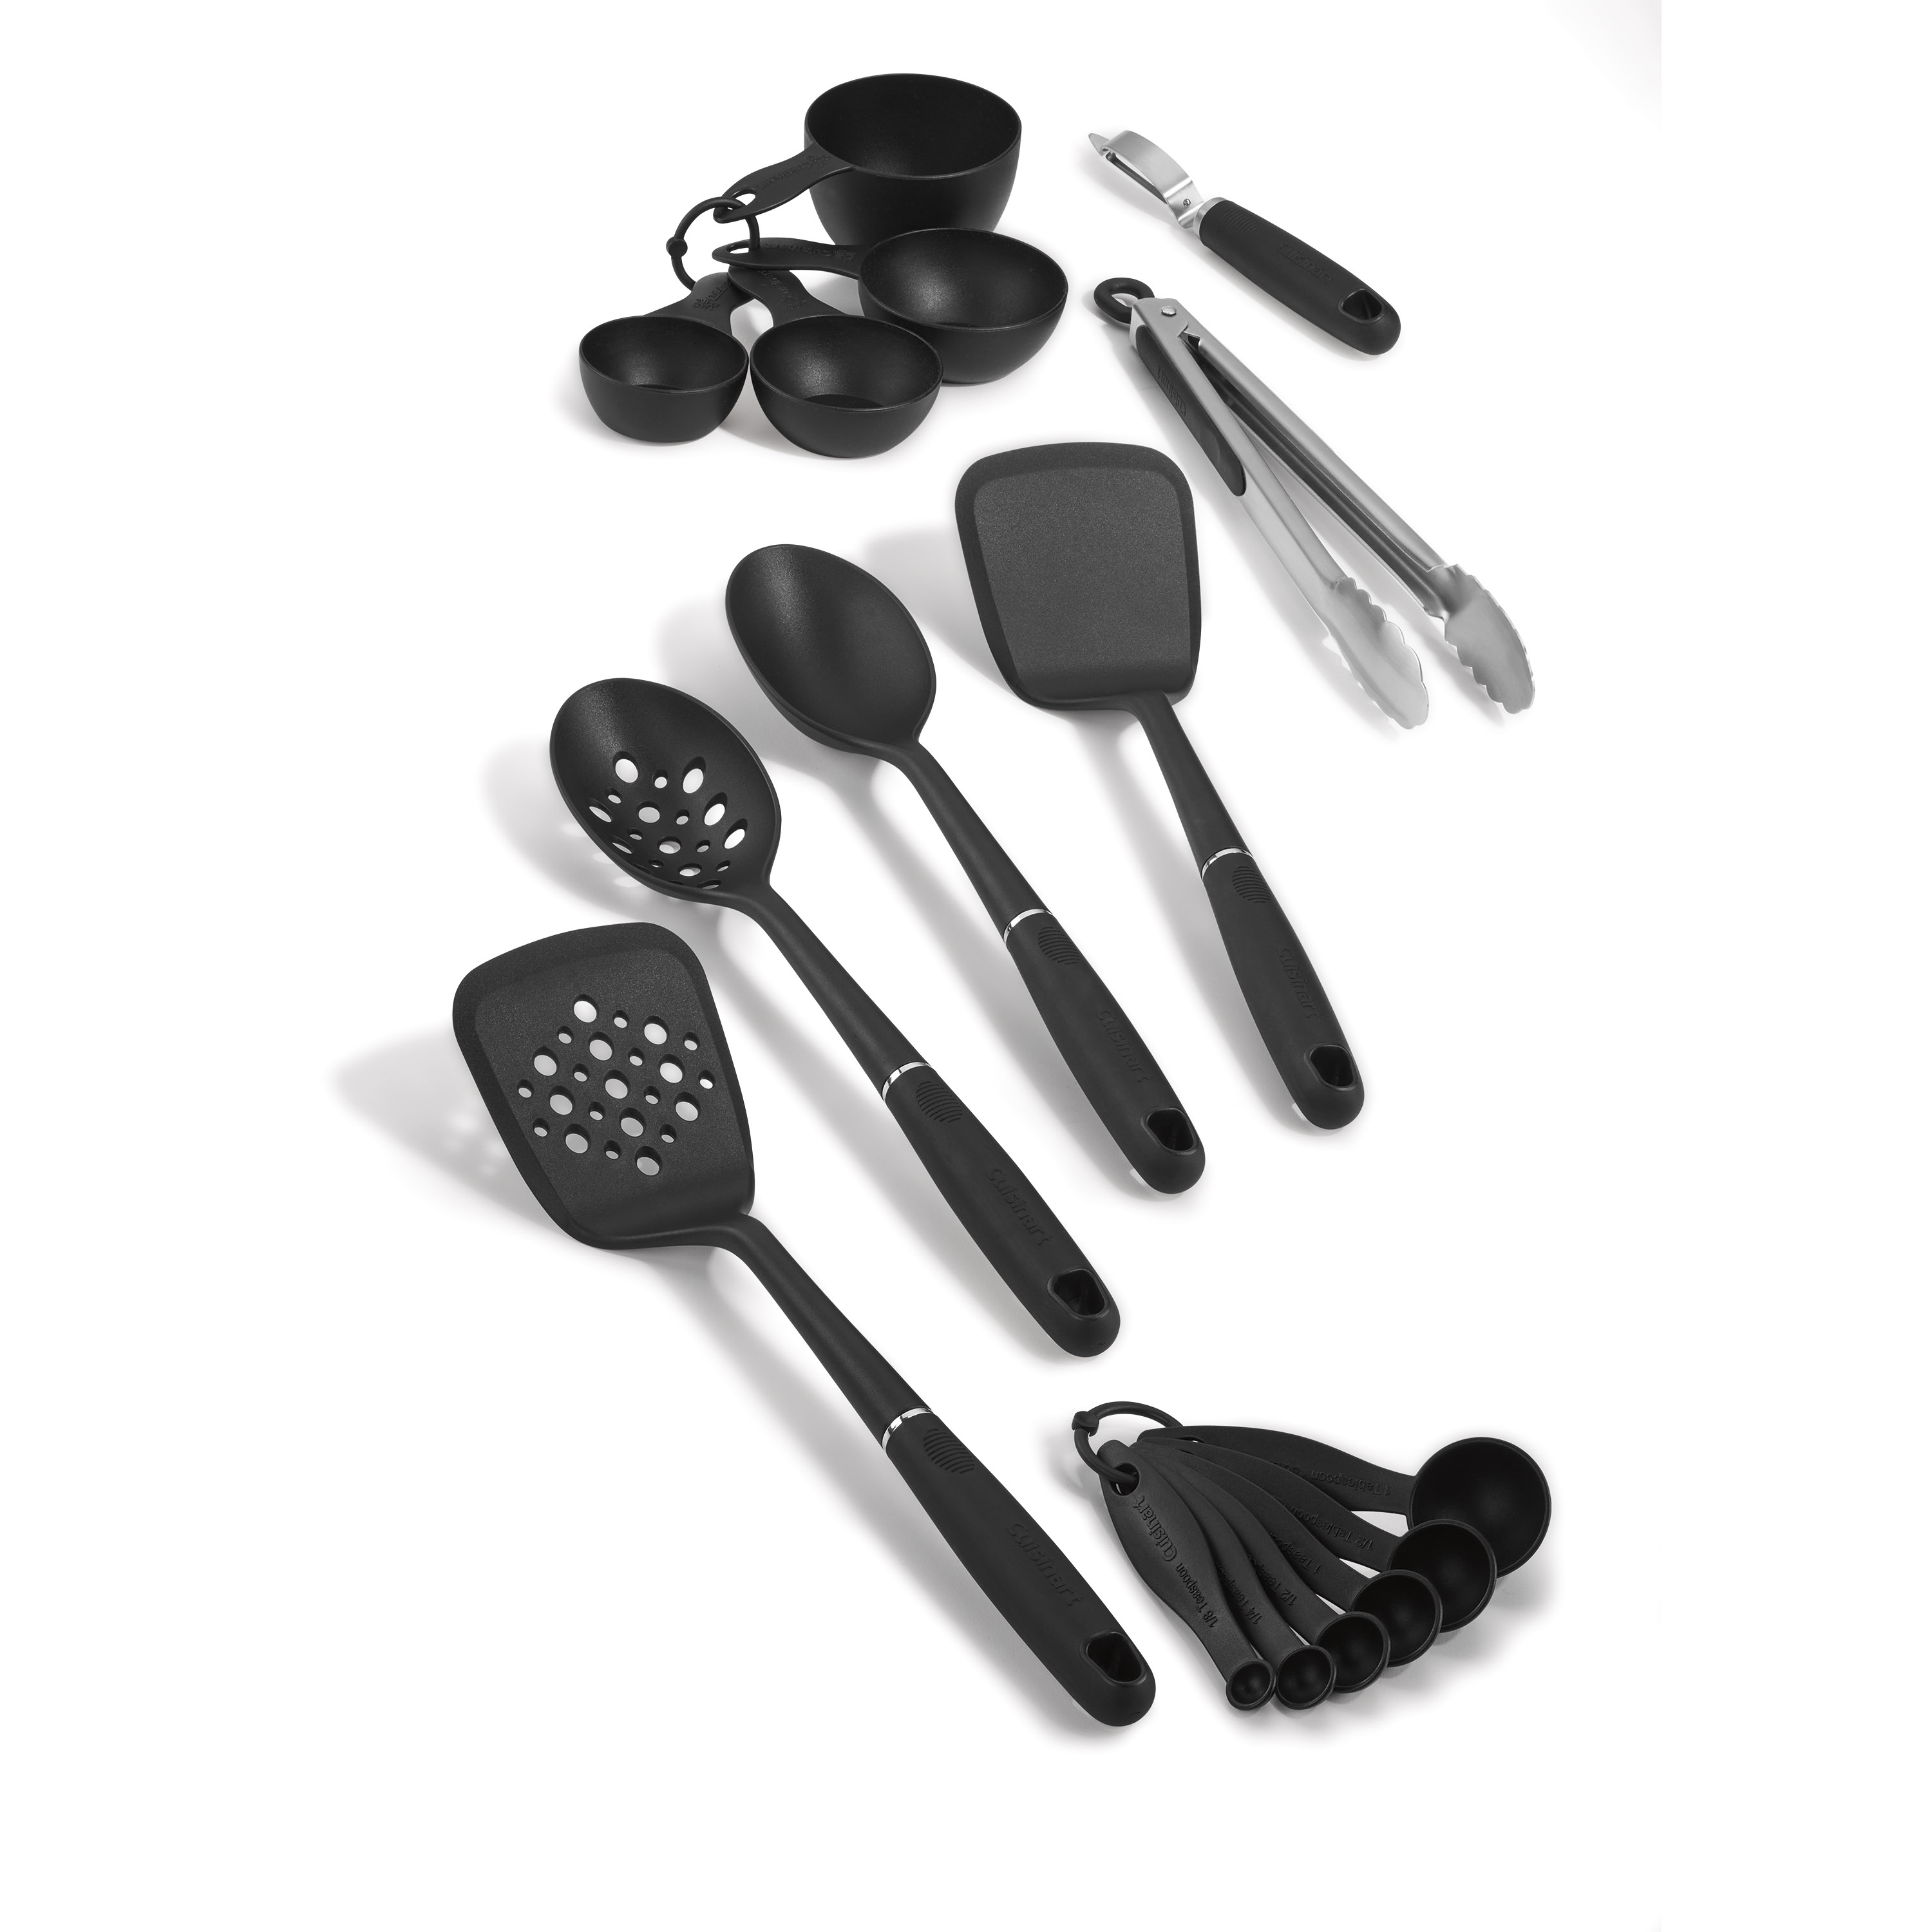 Cuisinart CTG-16-LS Primary Collection Nylon Slotted Spoon, Black